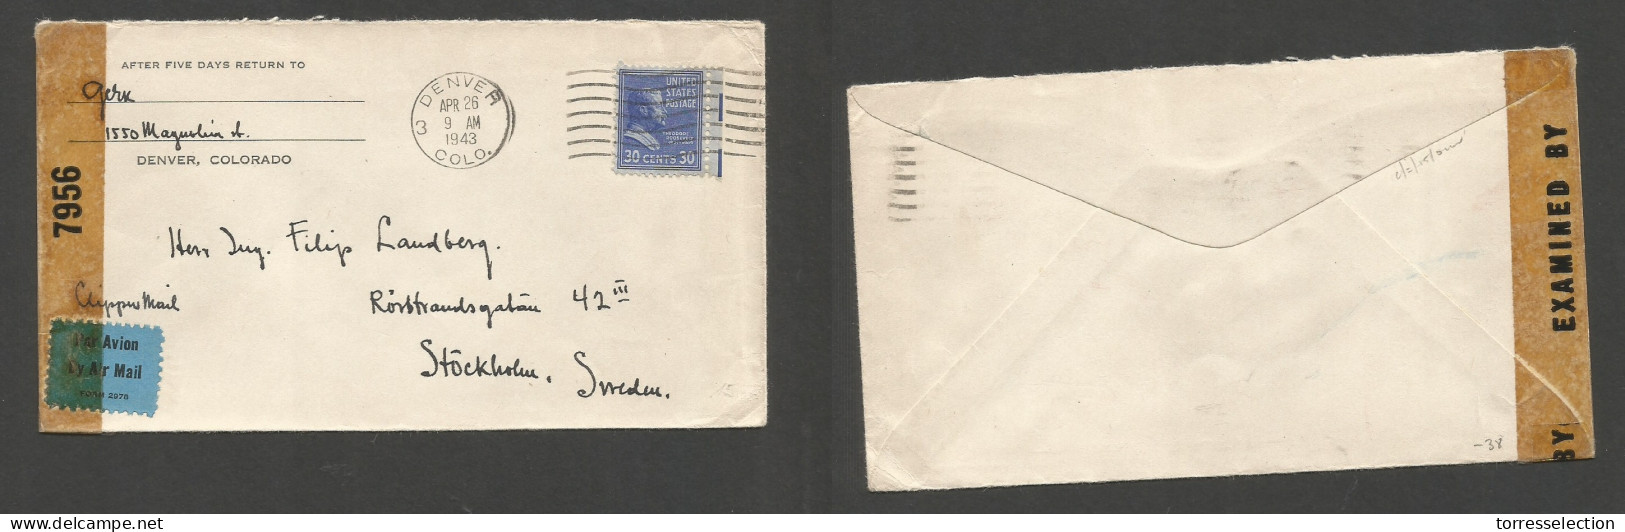 USA - Prexies. 1943 (26 Apr) Denver, CPO - Sweden, Stockholm. 30c Rate Single Fkd WWII Censored Env. Airmail. XSALE. - Other & Unclassified